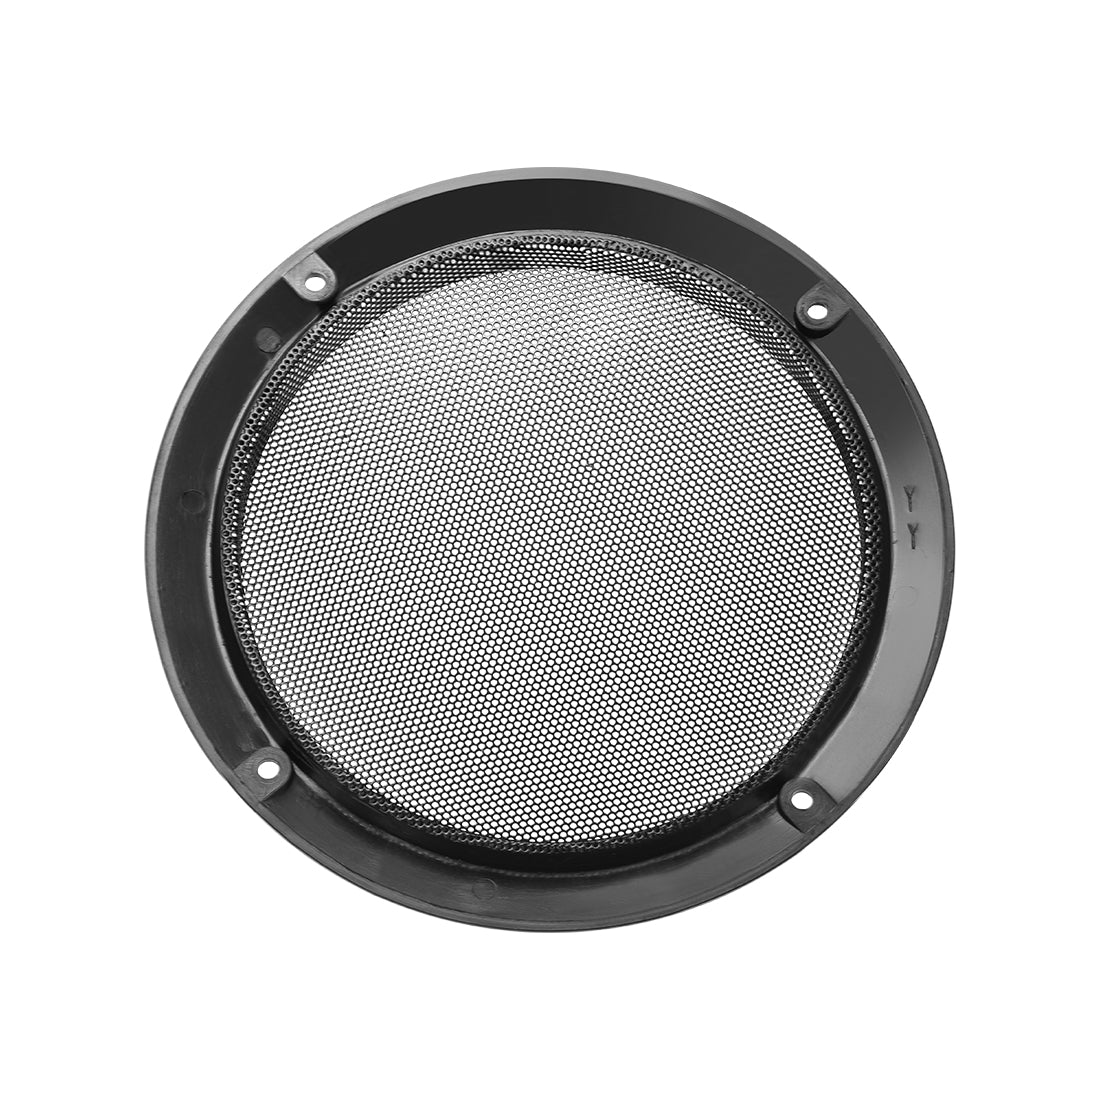 uxcell Uxcell 8" Speaker Grill Mesh Decorative Circle Woofer Guard Protector Cover Audio Accessories Black